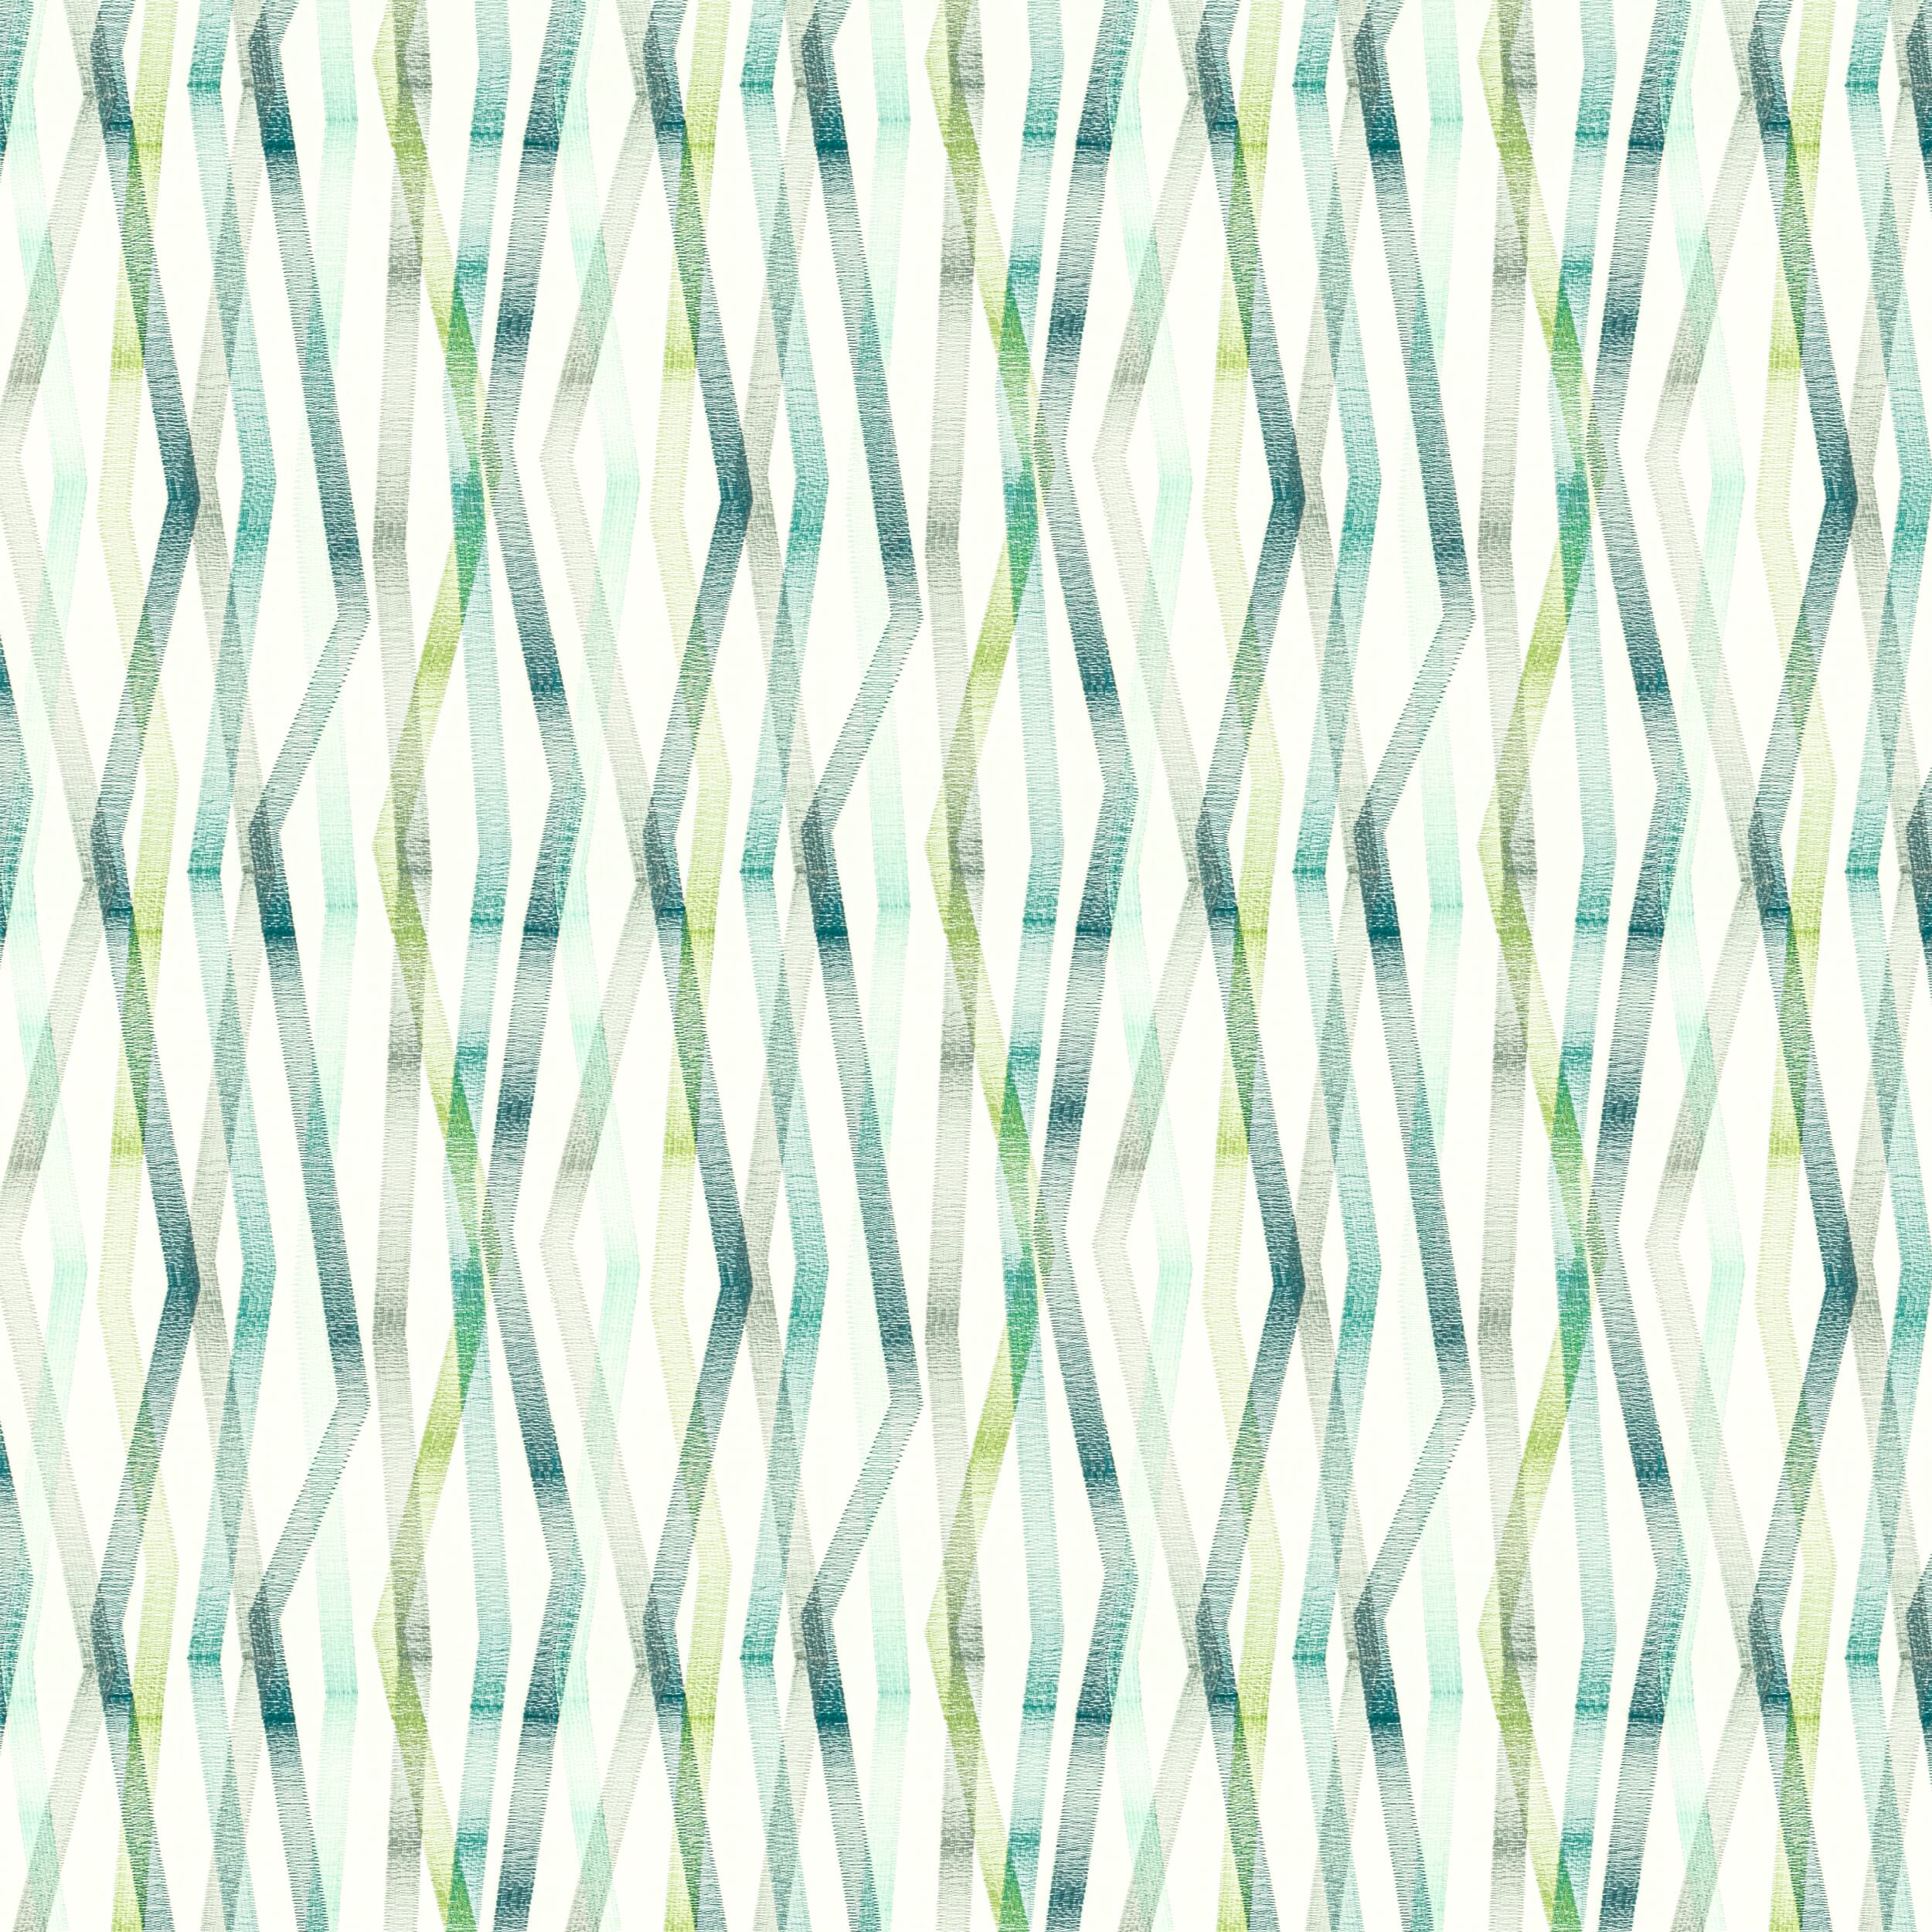 Javelin 2 Seaglass by Stout Fabric